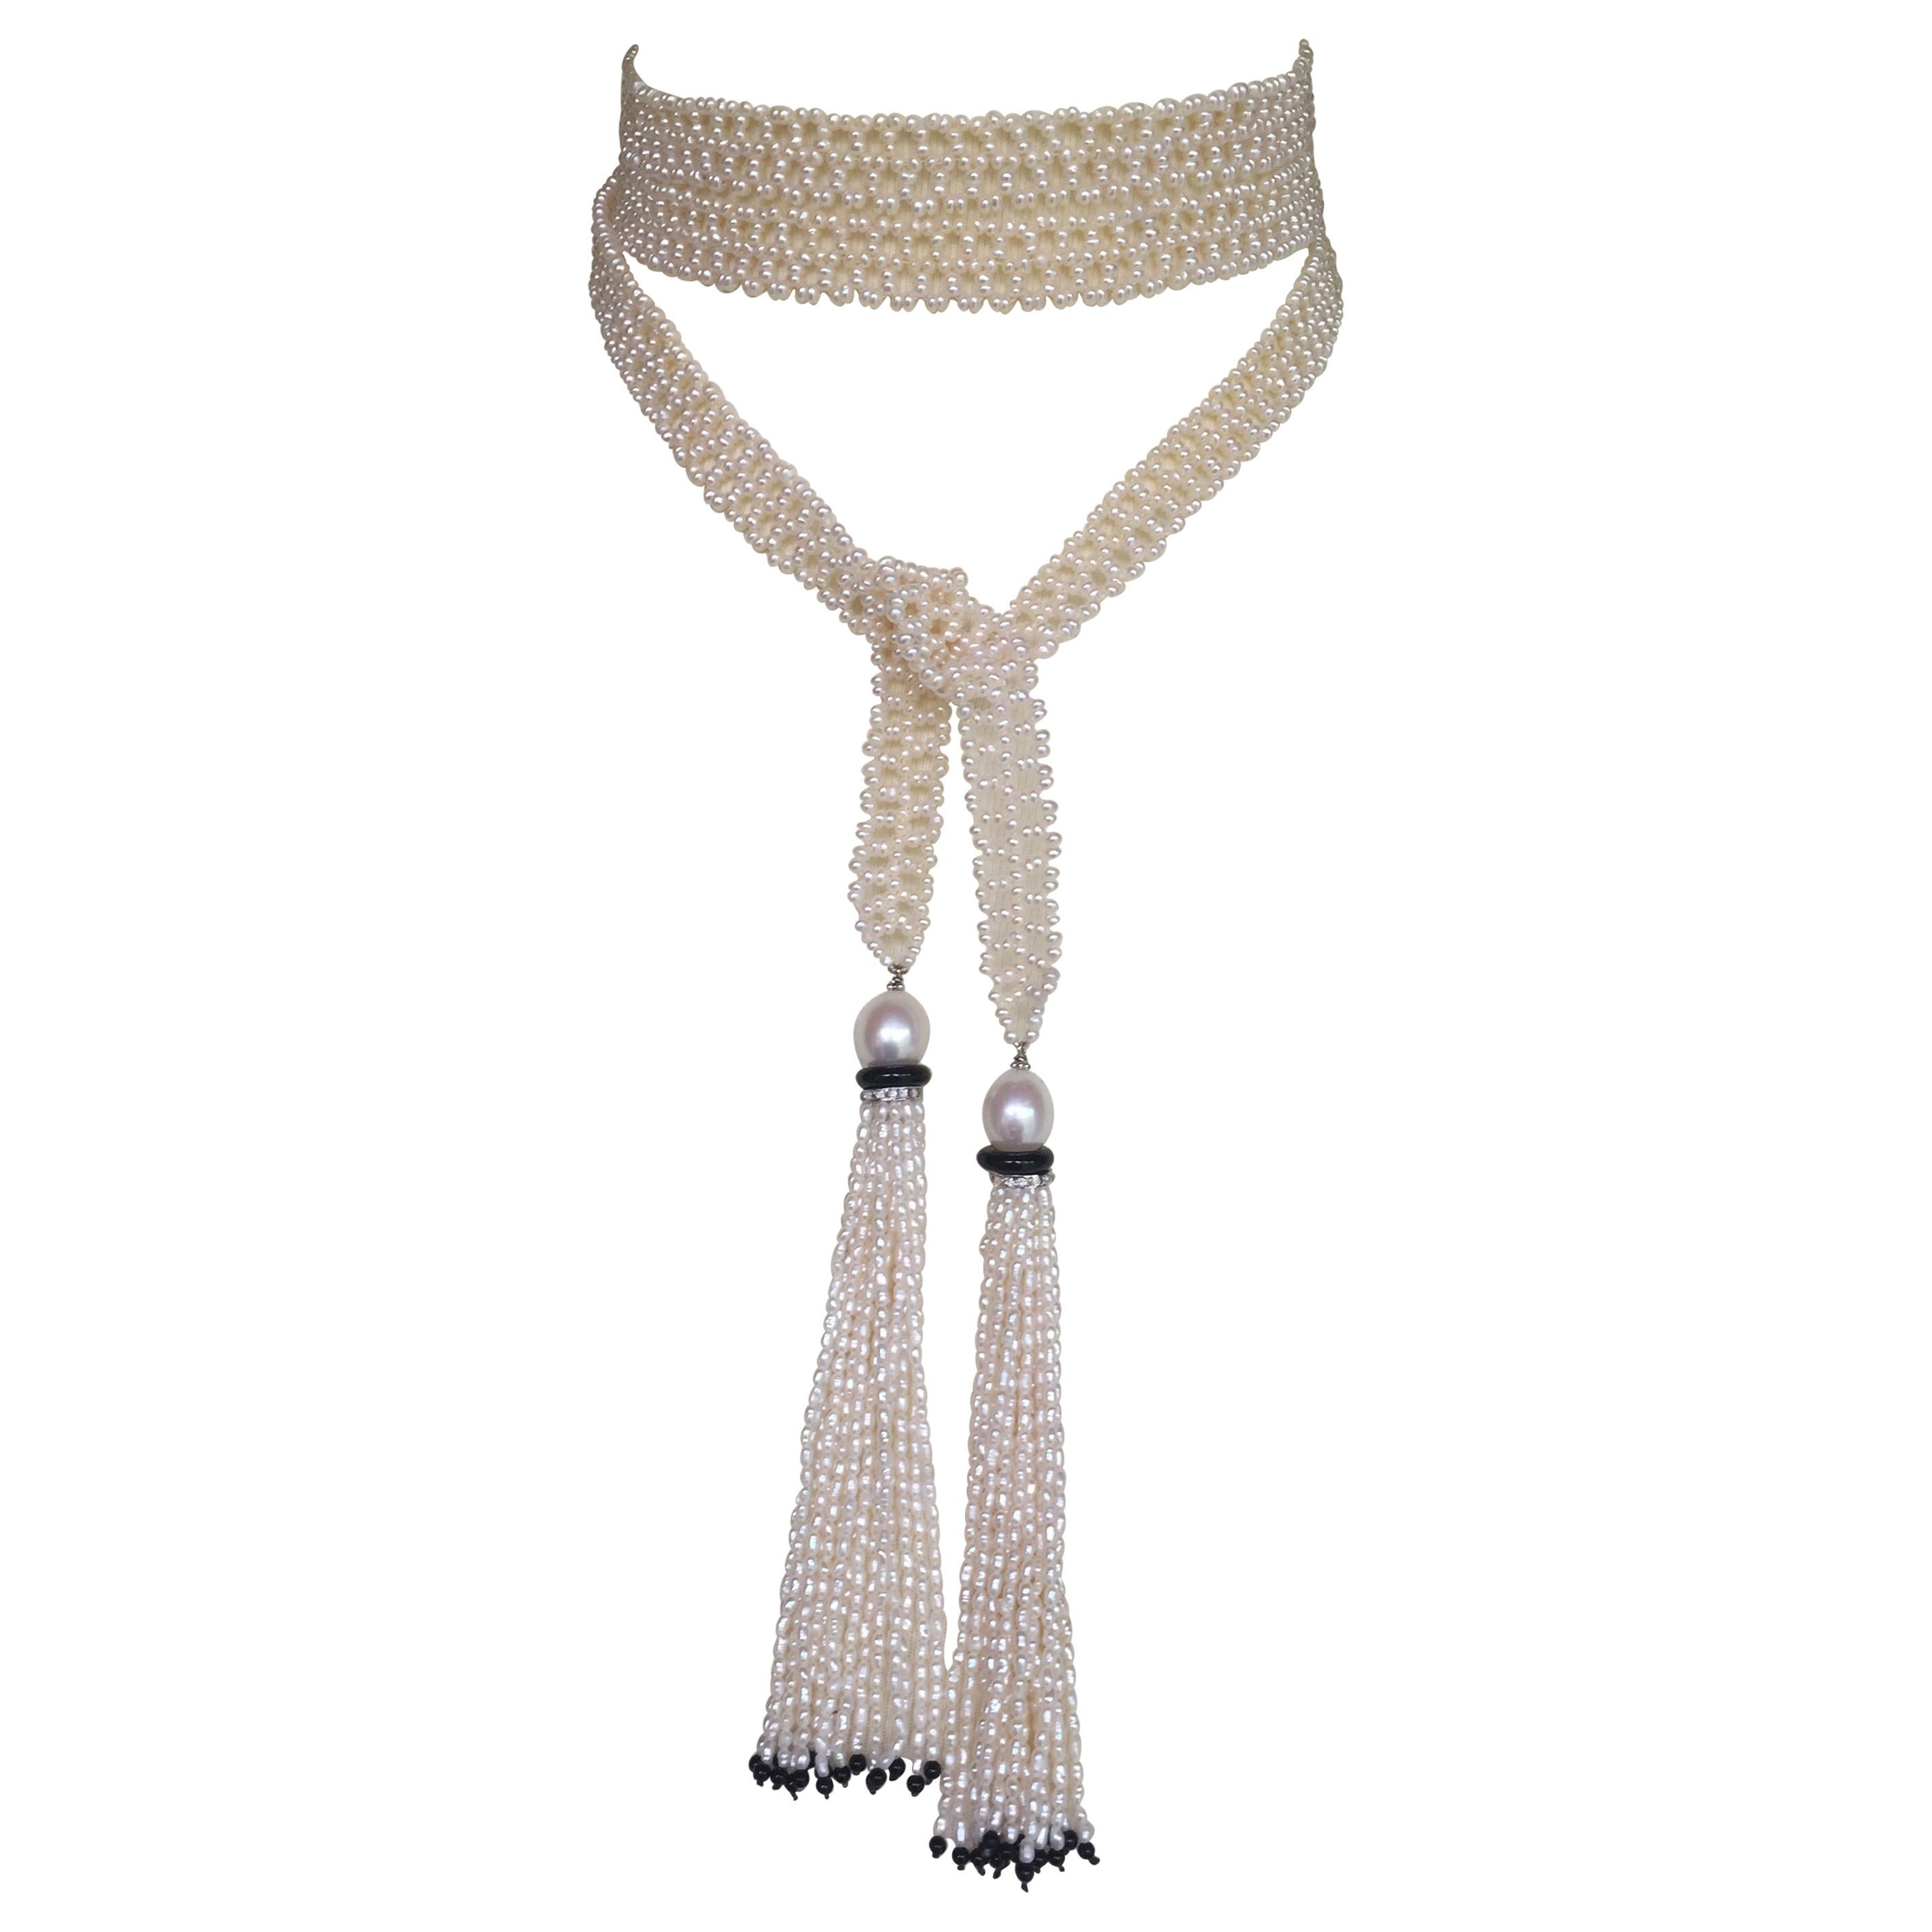 Marina J. Woven Seed Pearl Sautoir Necklace with Pearl, Onyx and Diamond Tassels